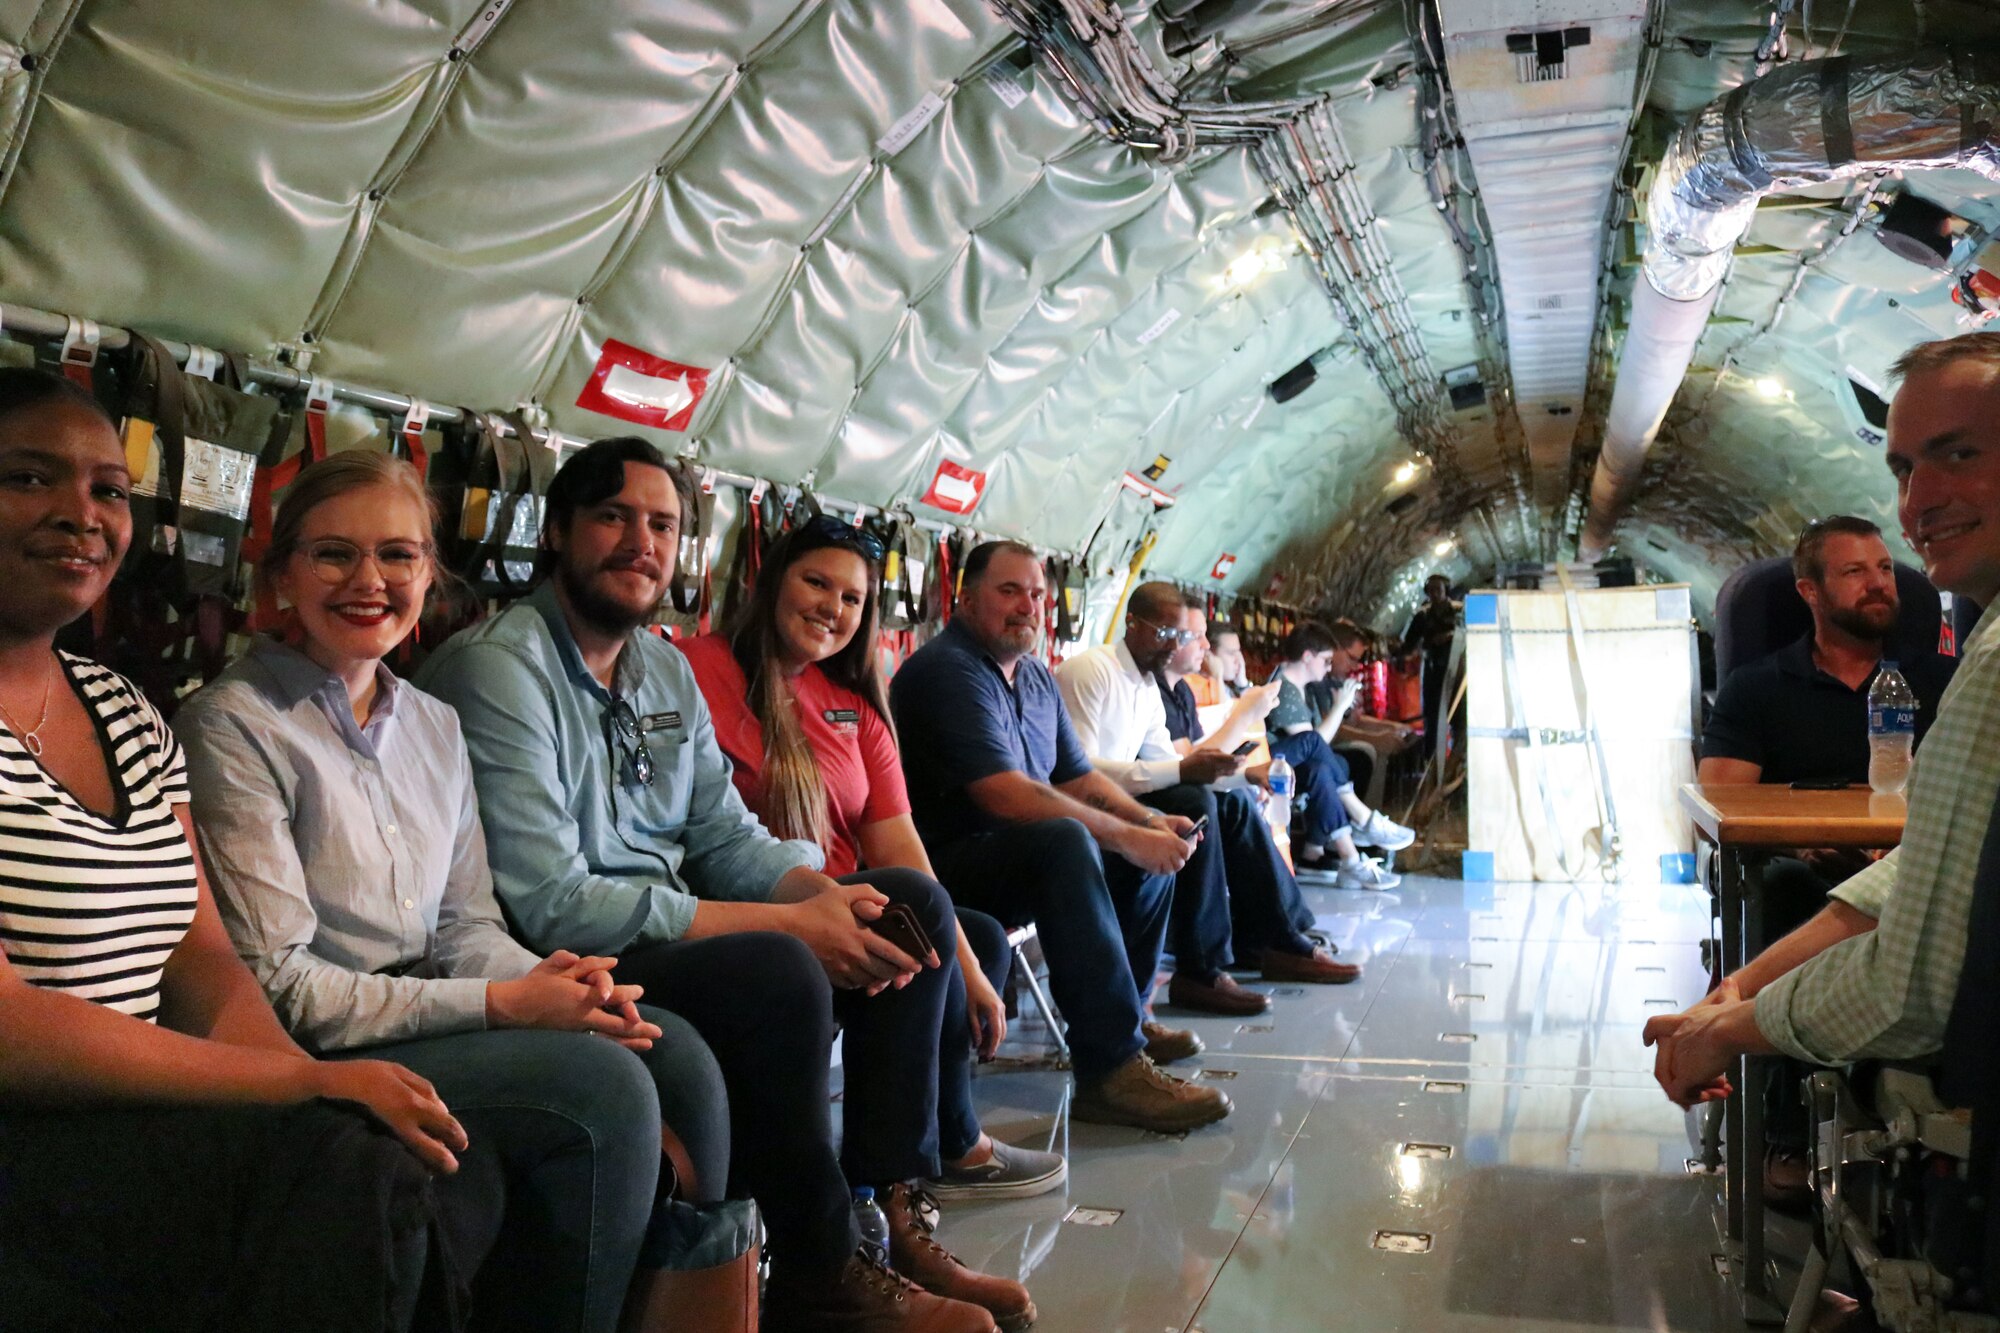 Congressmen and their staff join a 507th Air Refueling Wing flight crew on a KC-135R Stratotanker for an orientation flight Aug. 15, 2019, at Tinker Air Force Base, Oklahoma. The Okies shared the Reserve mission and a unique experience with the congressional delegation. (U.S. Air Force photo by Senior Airman Mary Begy)